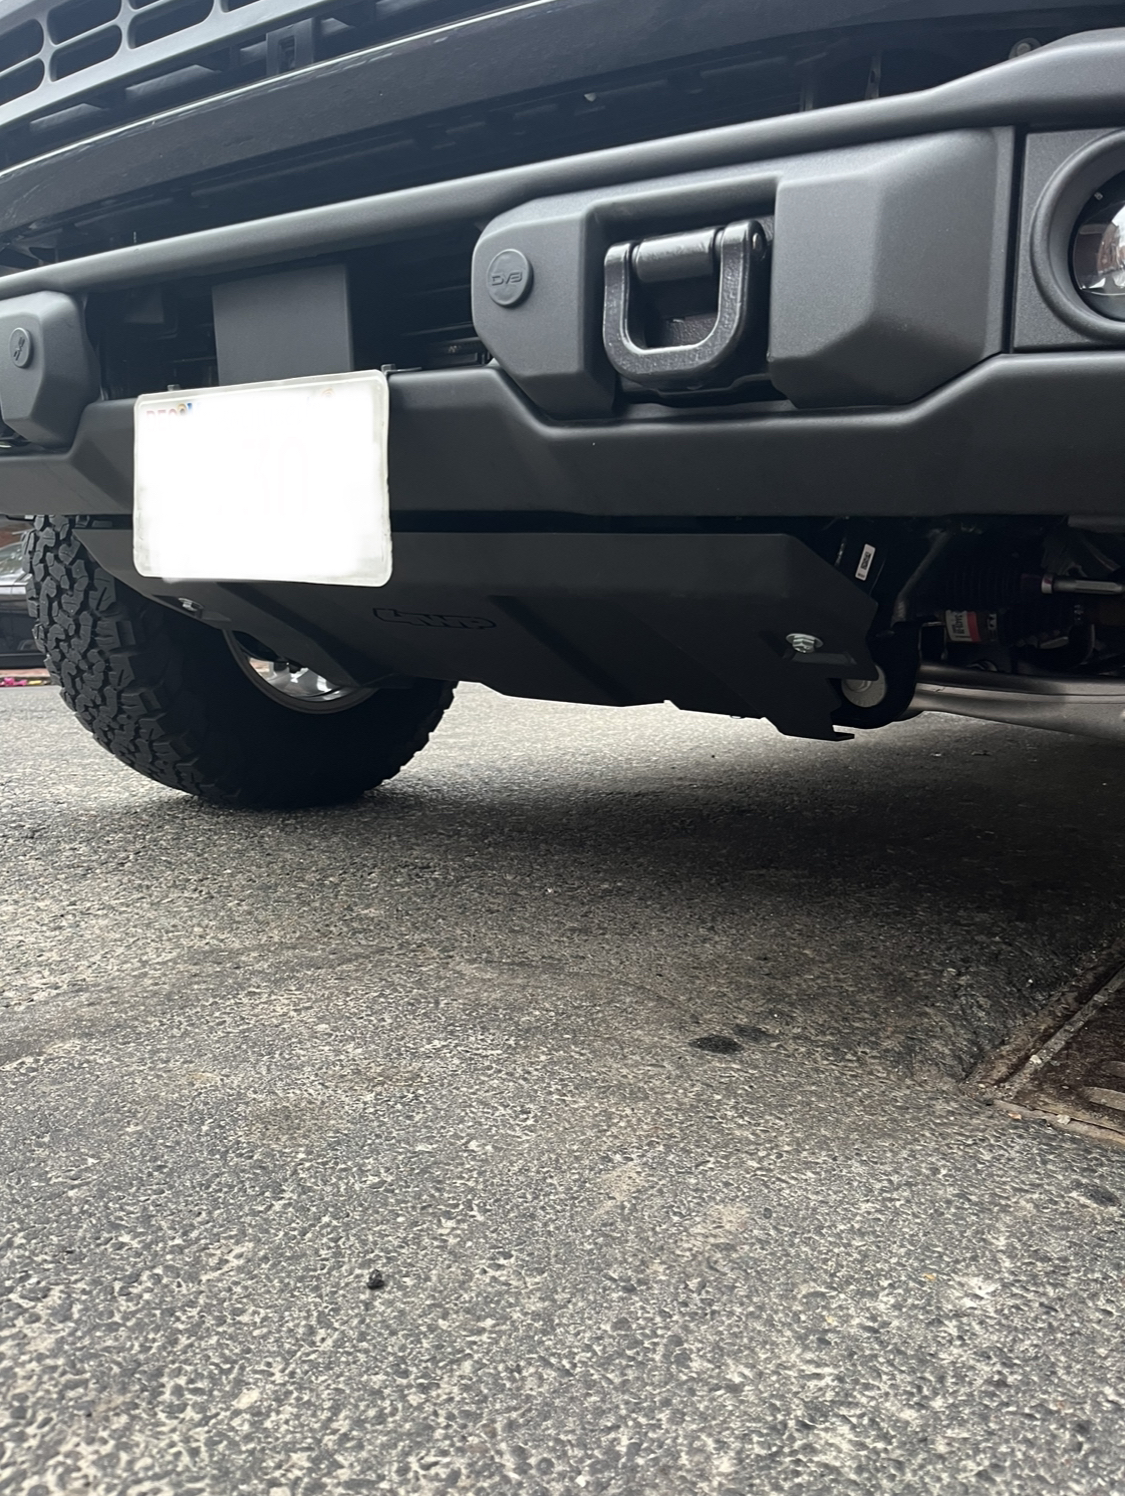 Ford Bronco 4wp bumper and skid plate IMG_3629